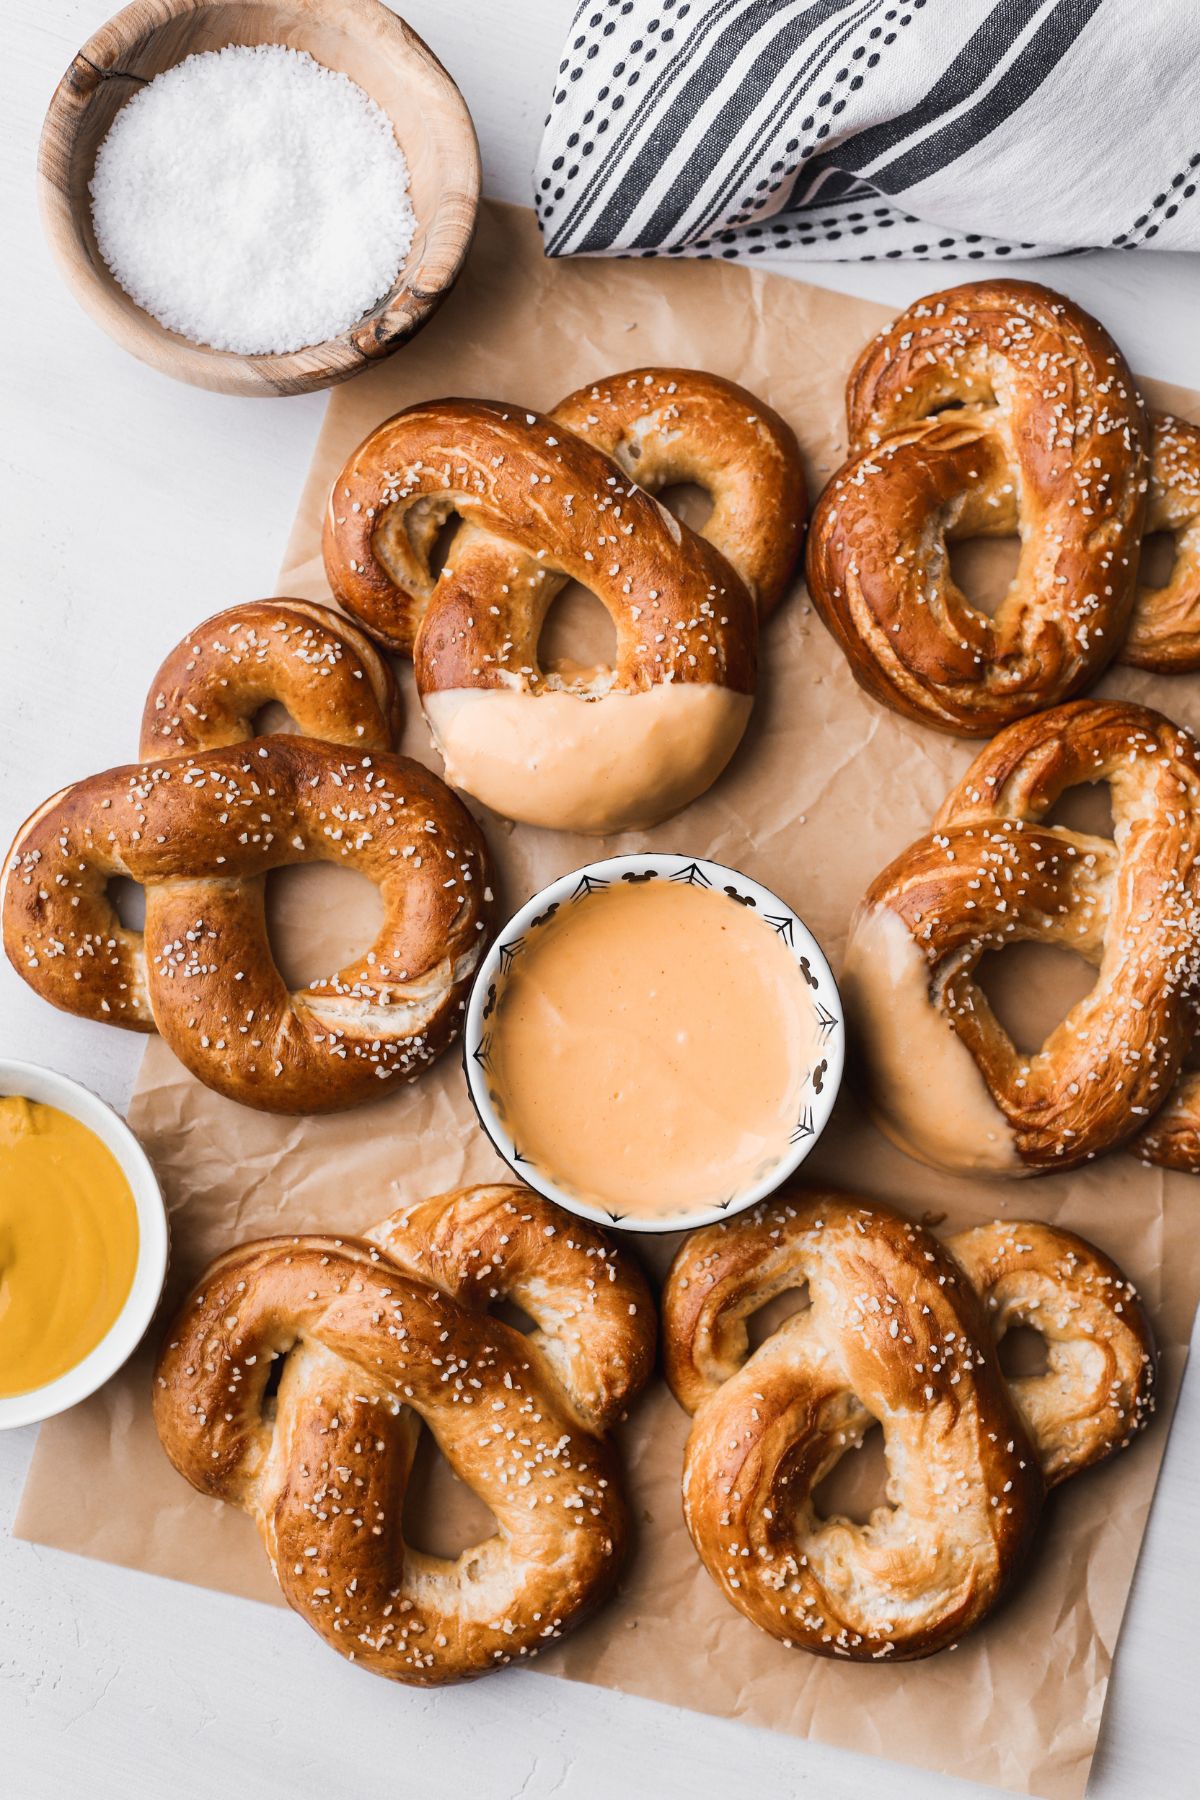 Mickey pretzels served with a cheesy mustard dipping sauce.